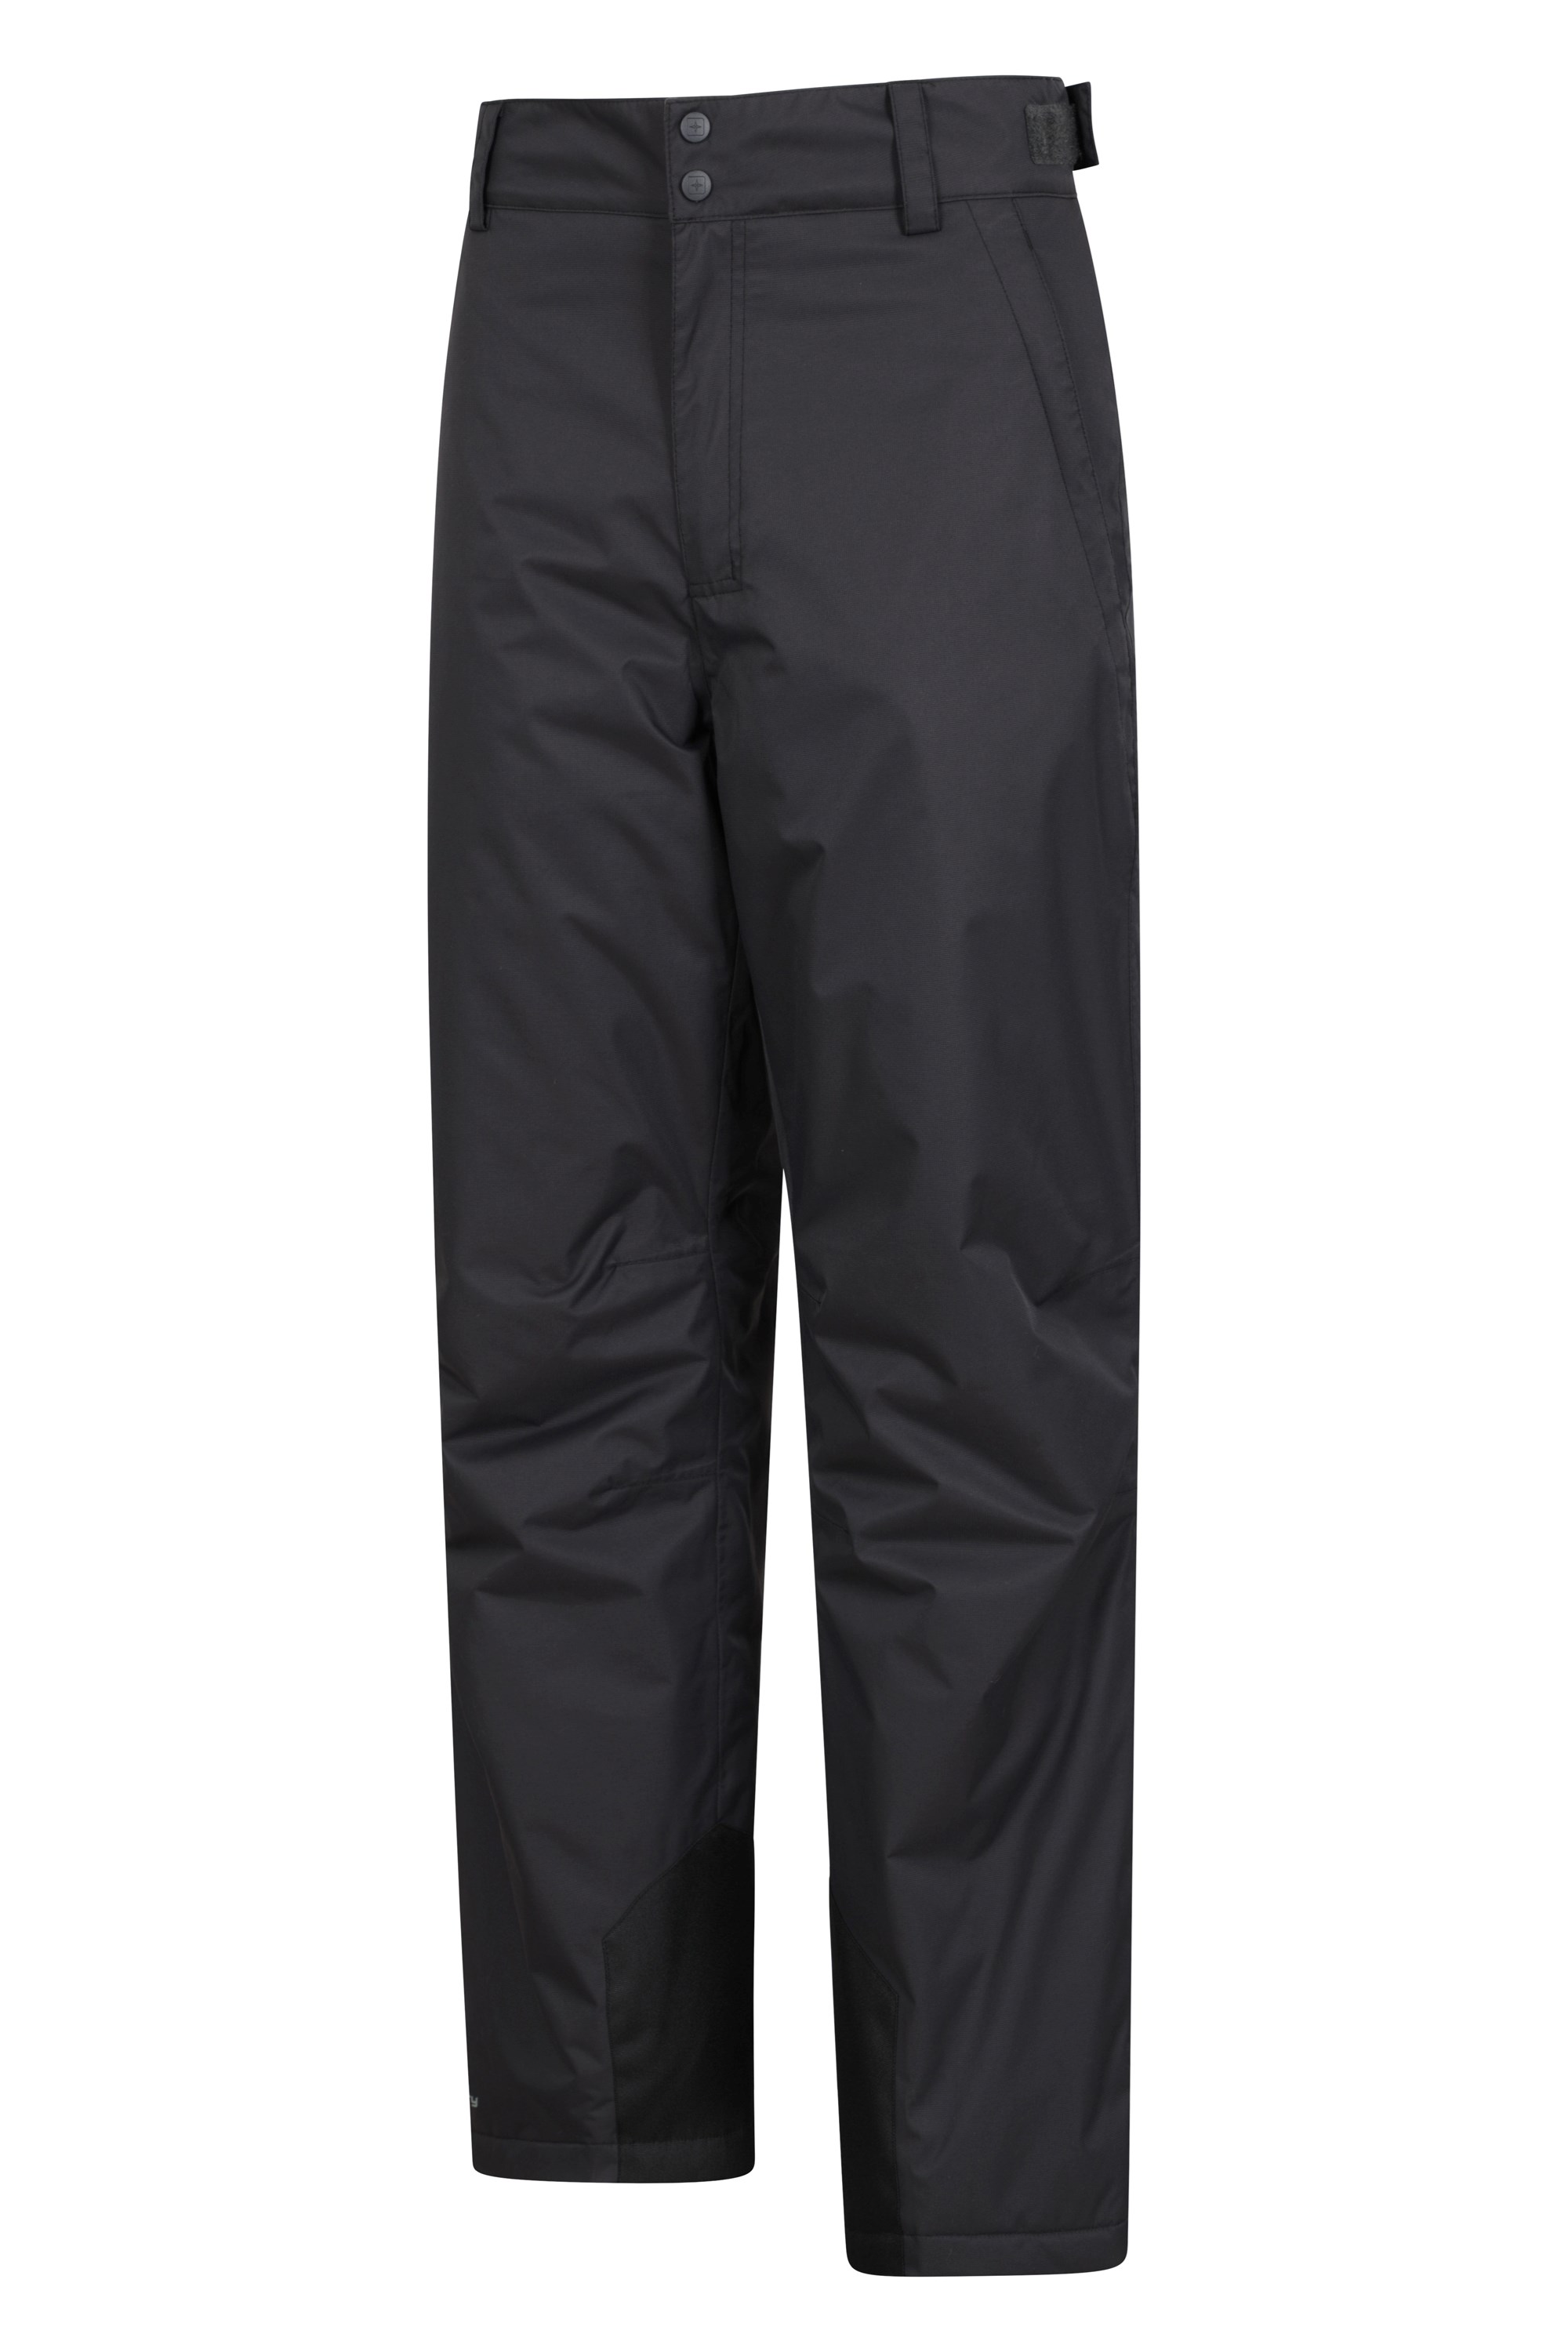 Best womens ski pants of 20192020 Waterproof and insulated salopettes  for the new season  The Independent